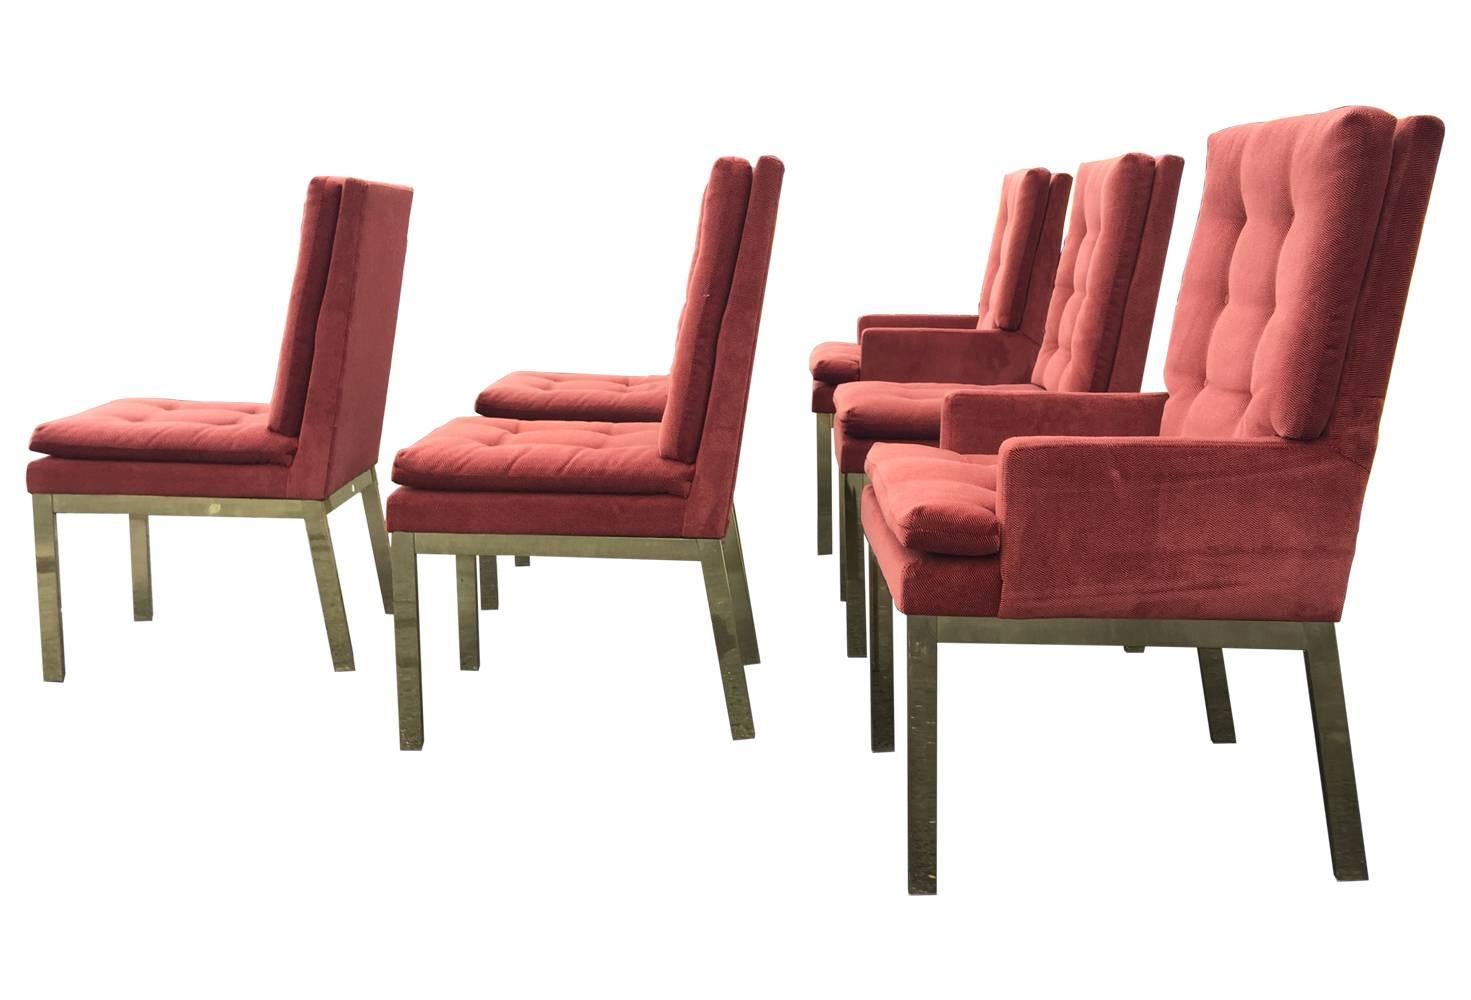 A lovely set of six brass Parsons style dining chairs designed by Milo Baughman for Design Institute of America. Labels intact. Upholstered in a salmon pink and burgundy red herringbone velvet. Great condition, one seat has a pen mark (pictured),